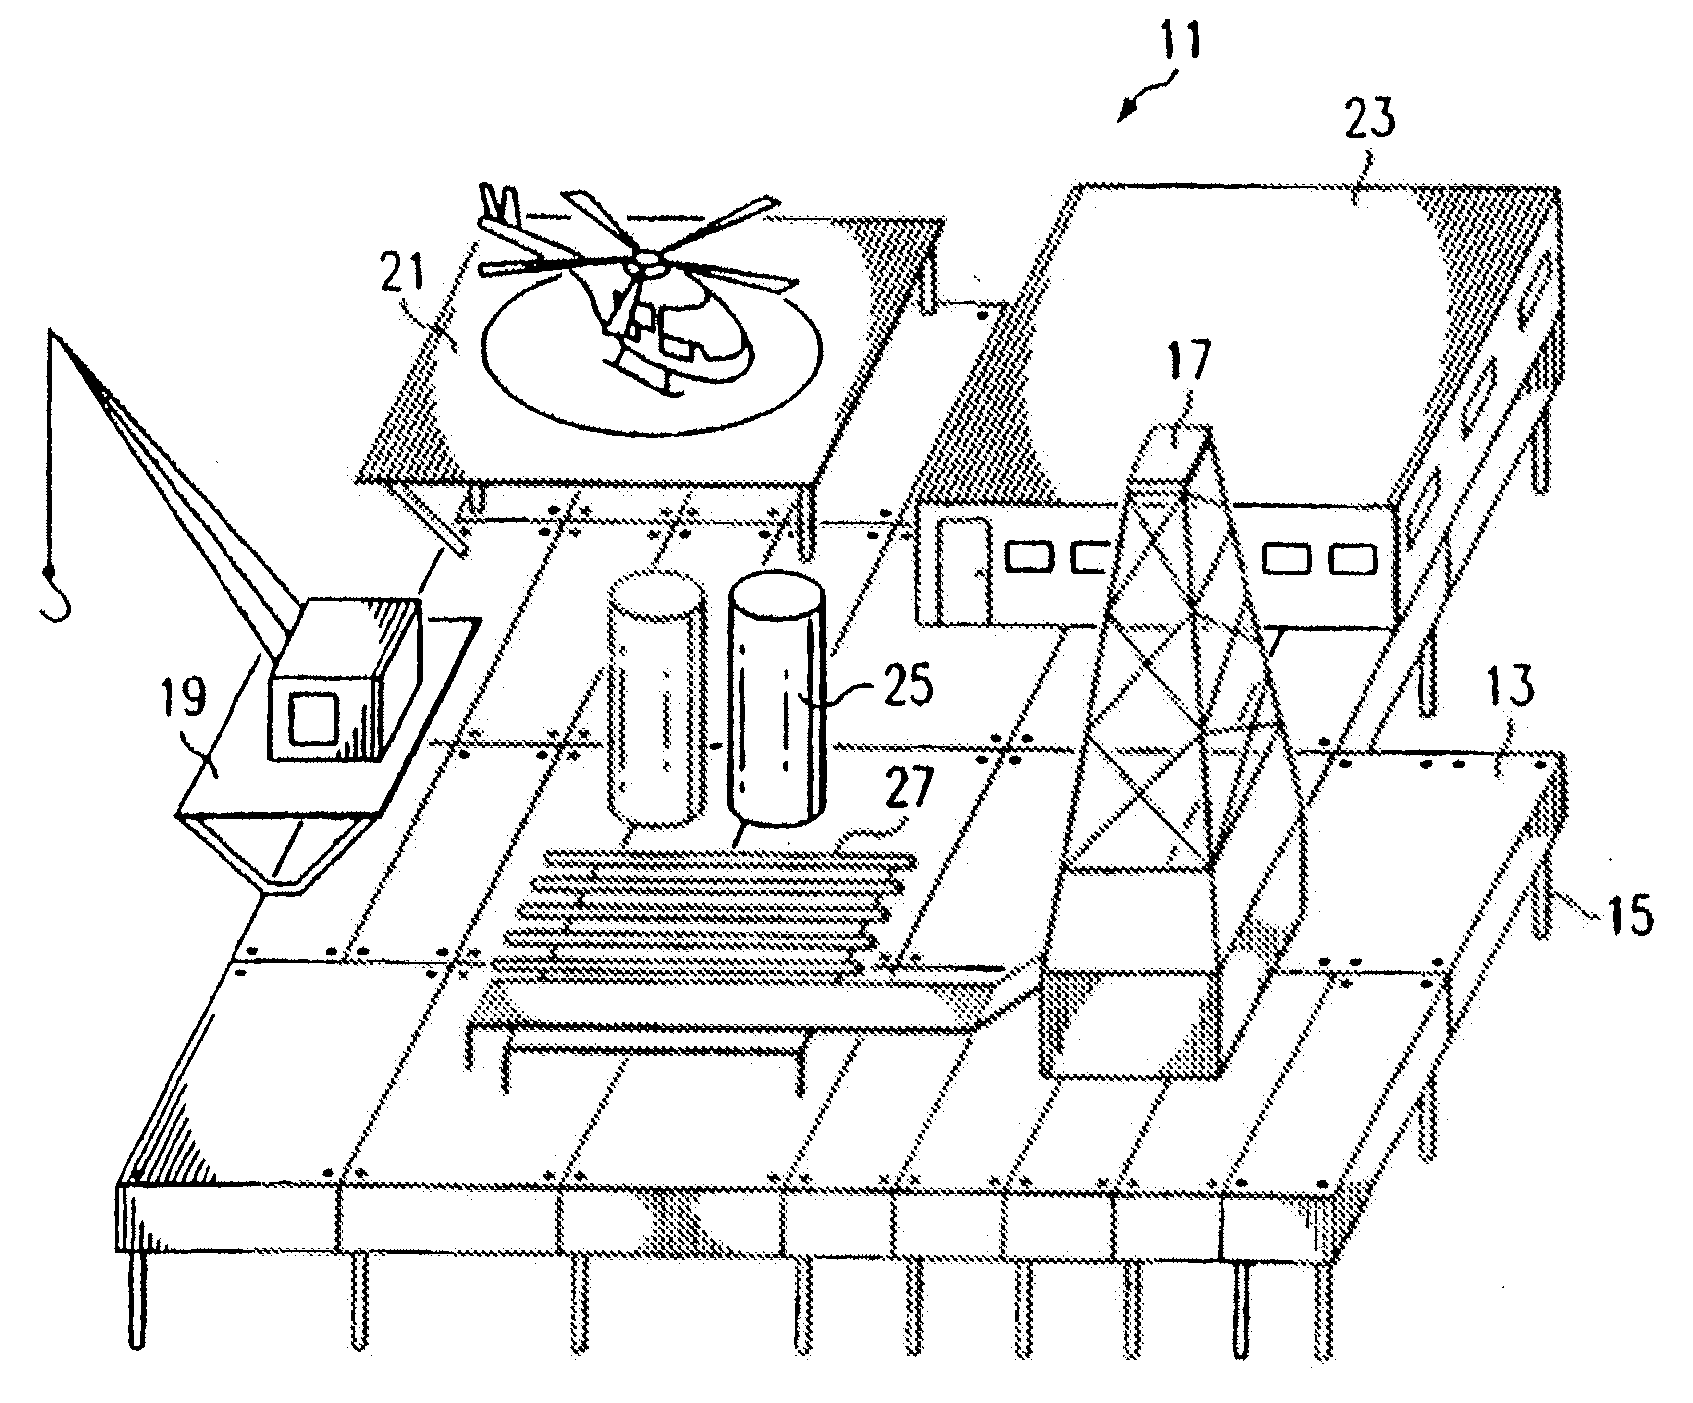 Method and System for Building Modular Structures from Which Oil and Gas Wells are Drilled